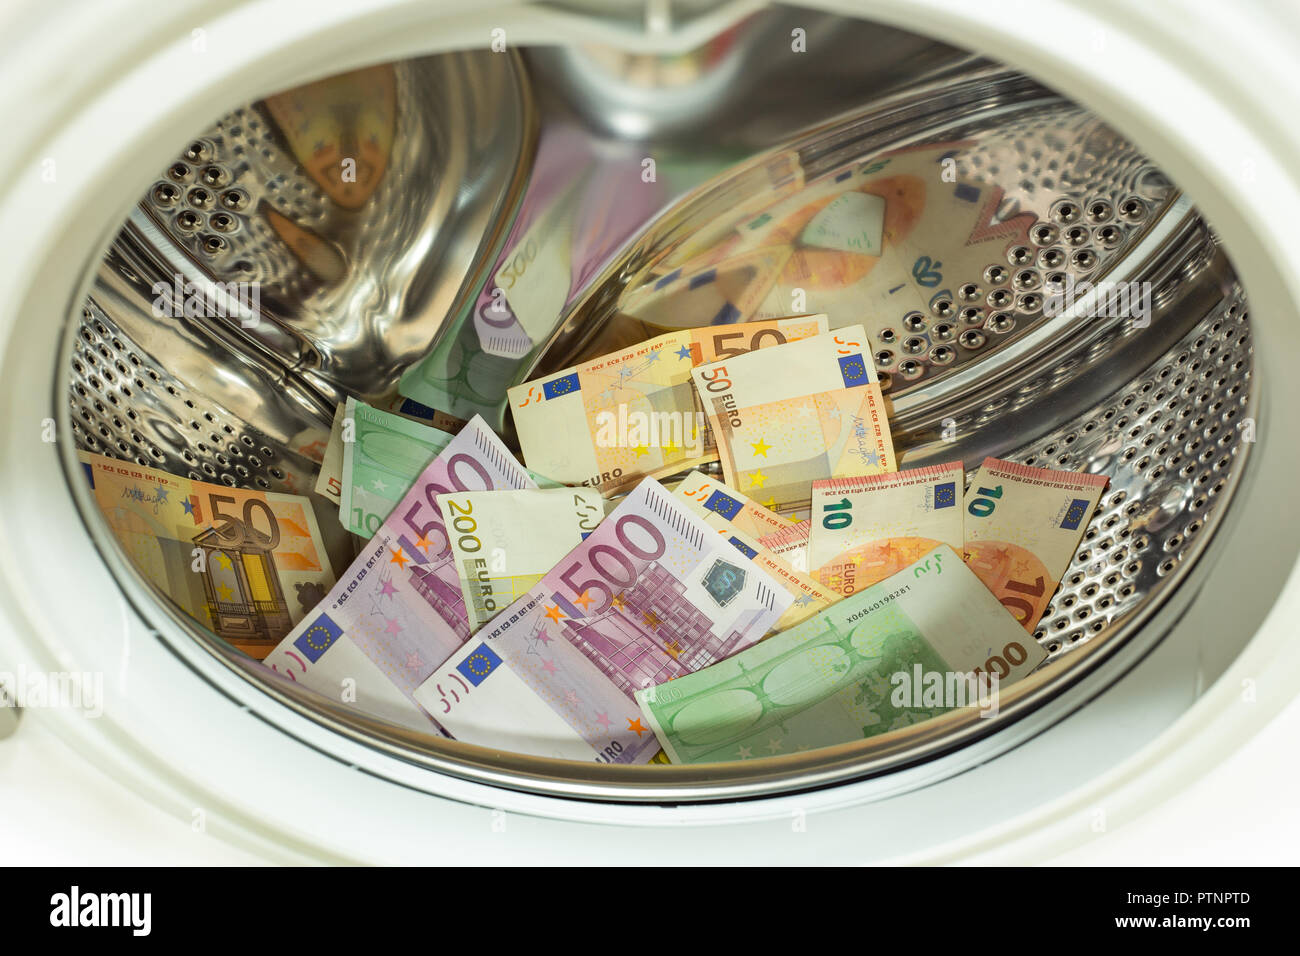 Euro / European currency, high denomination in the washing machine. Money laundering concept Stock Photo